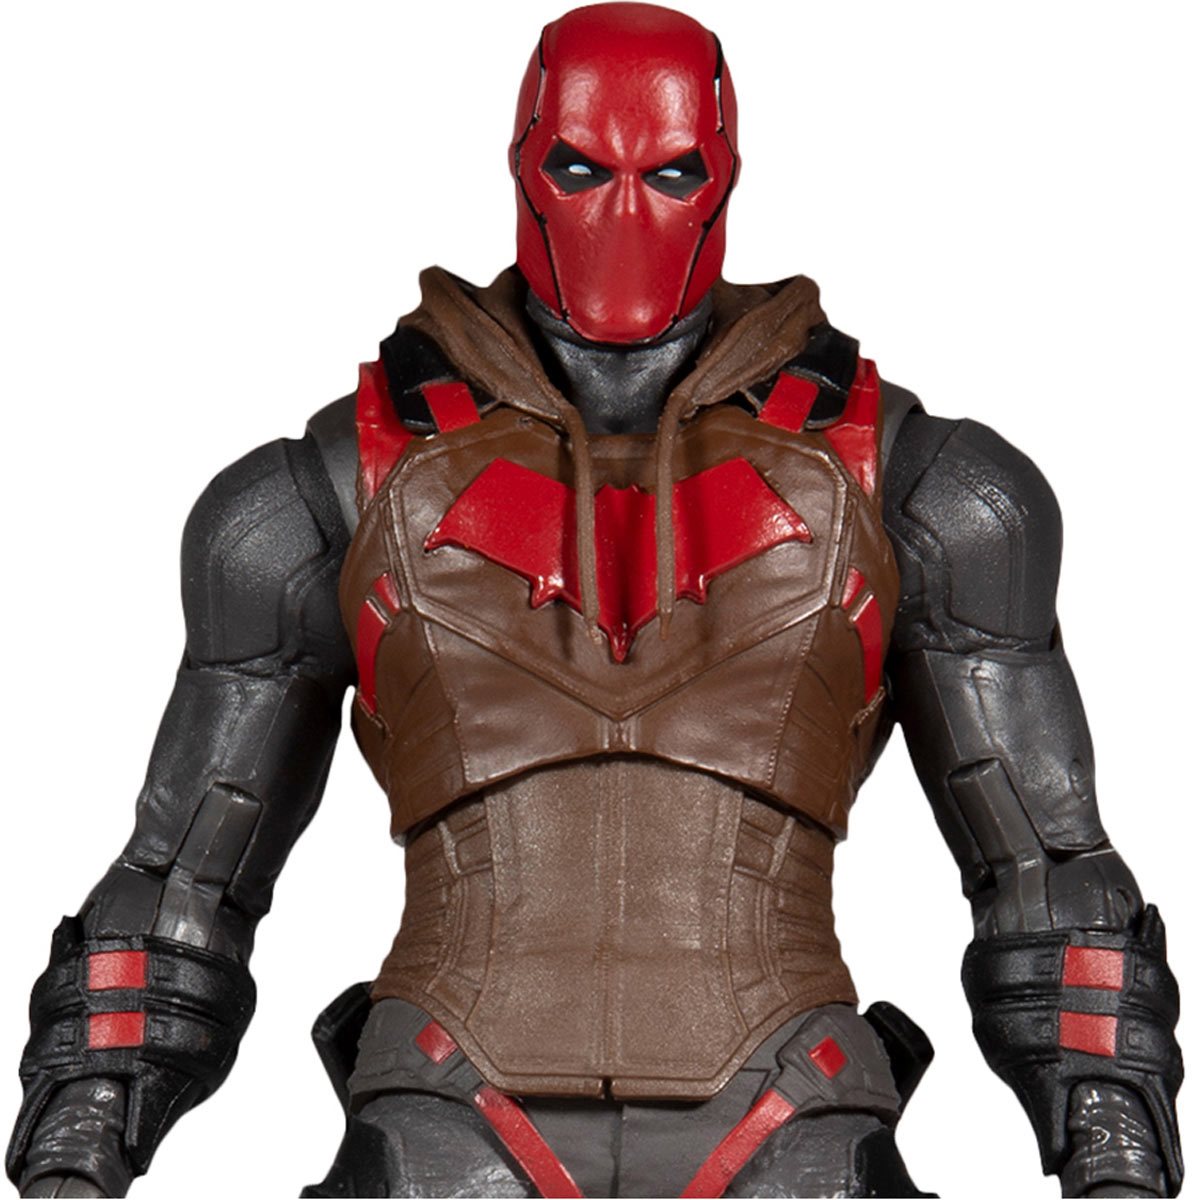 DC Gaming Figures Wv5 Red Hood 7 Inch Action Figure Case